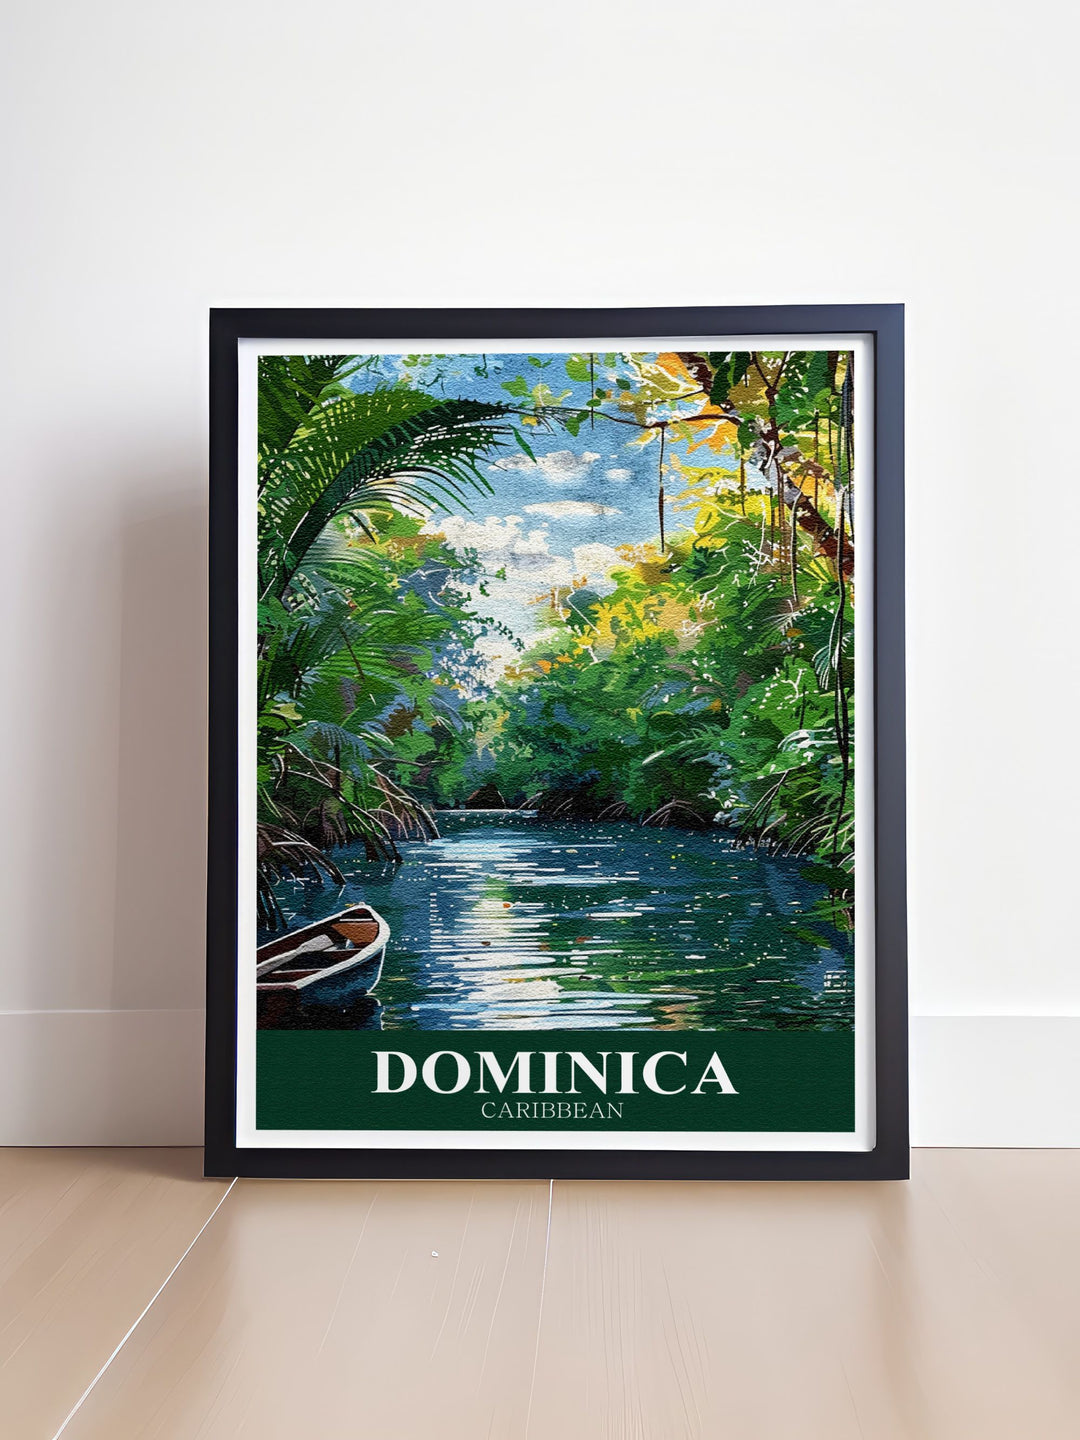 Caribbean Poster of Indian River in Dominica highlighting the vibrant scenery and peaceful atmosphere a perfect piece of Dominican wall art that brings the spirit of the island into your home suitable for various gifting occasions